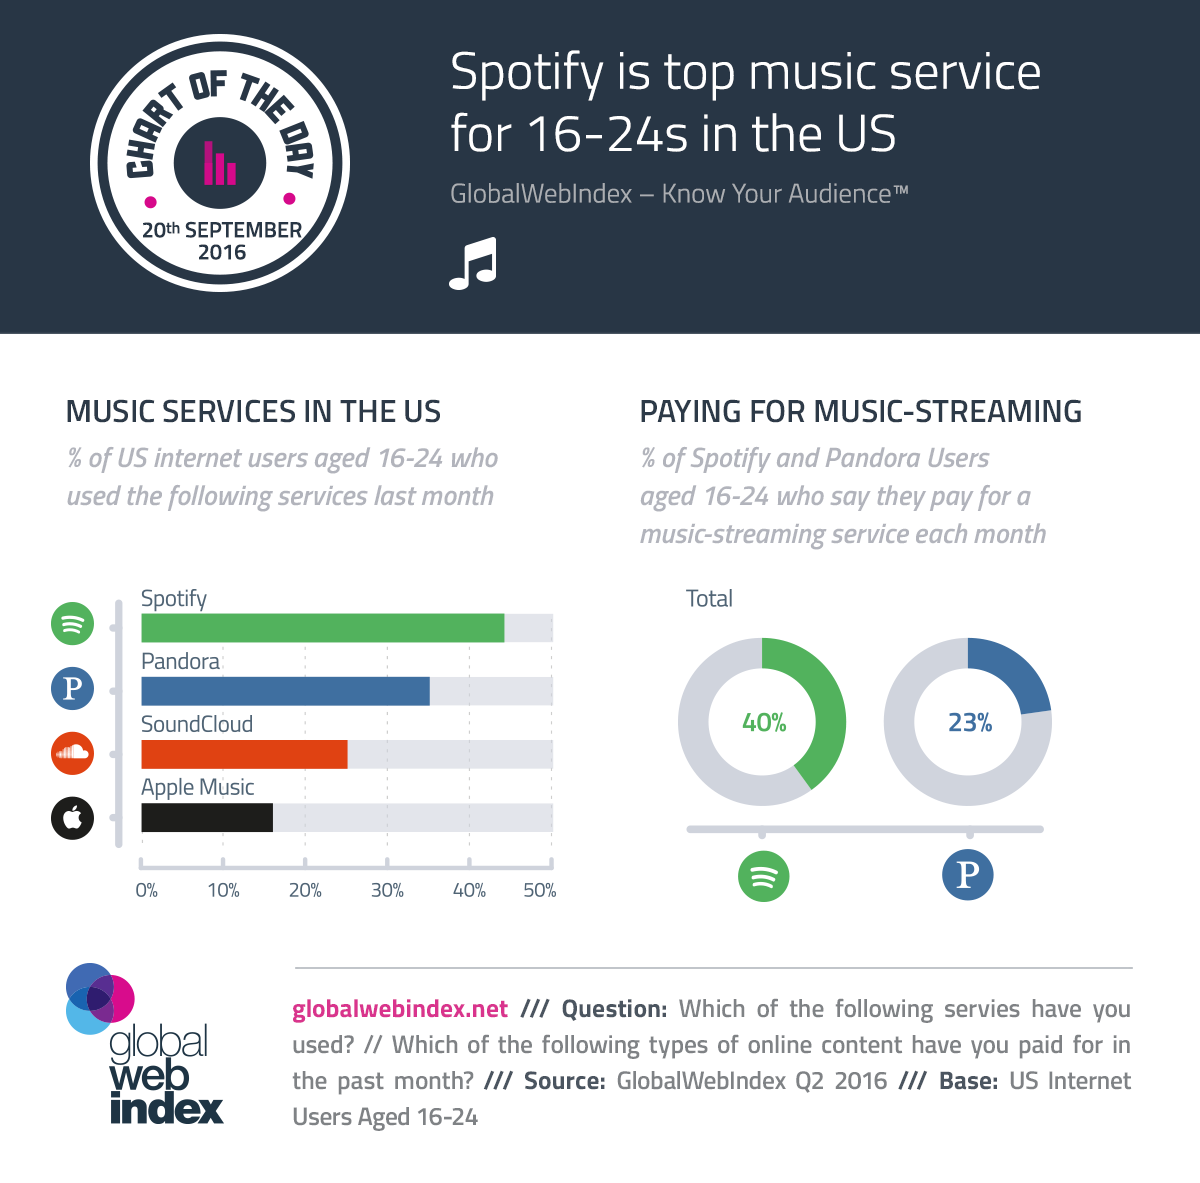 Spotify is top music service for 16-24s in the US